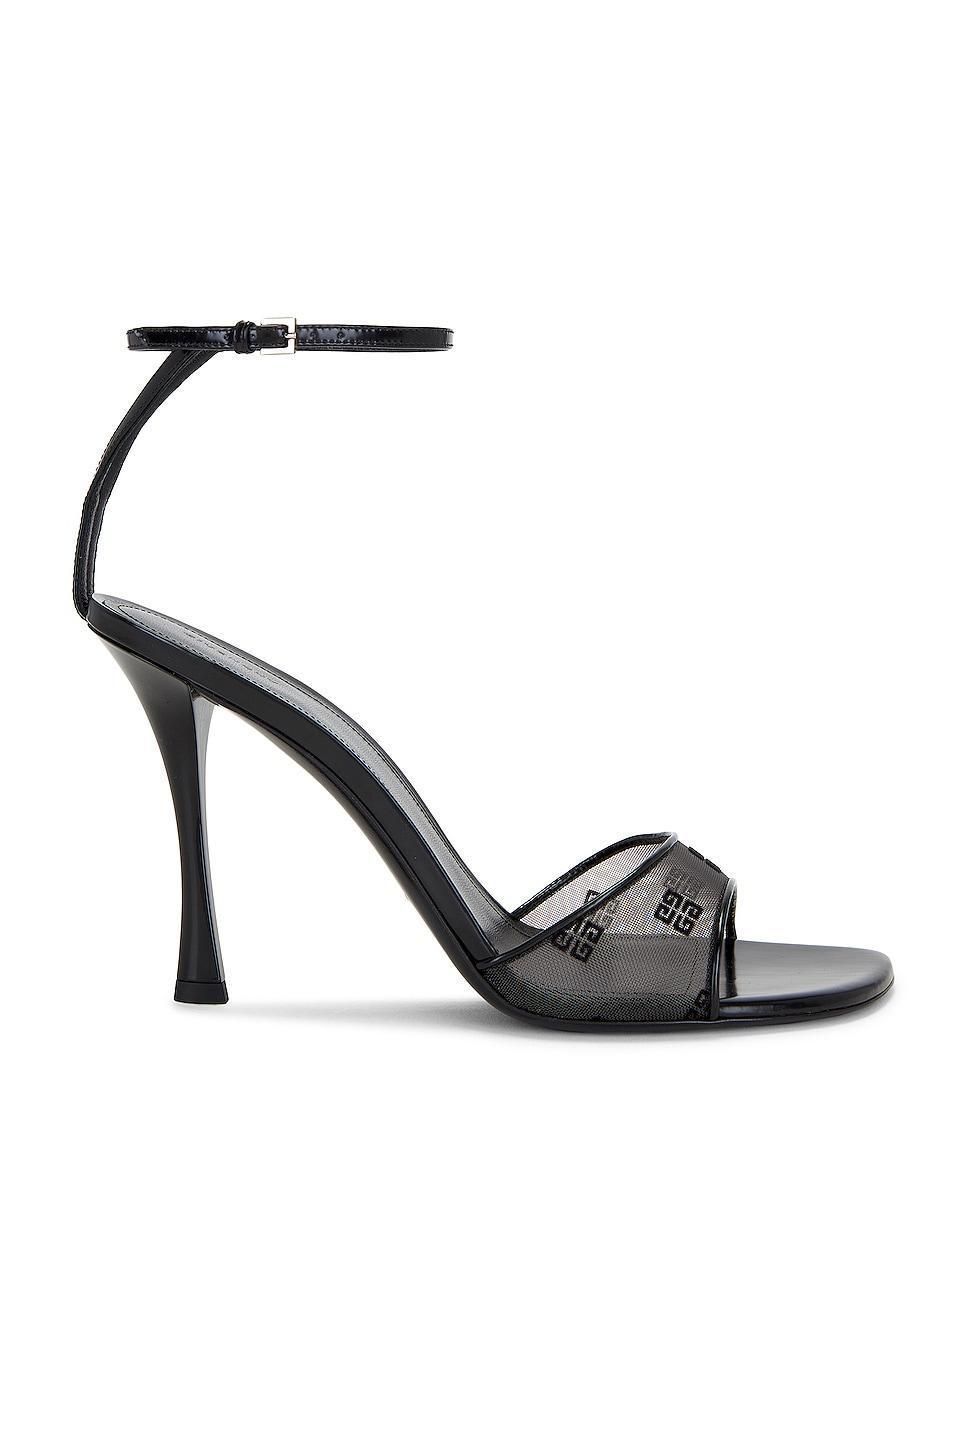 Givenchy Stitch Sandal in Black Product Image